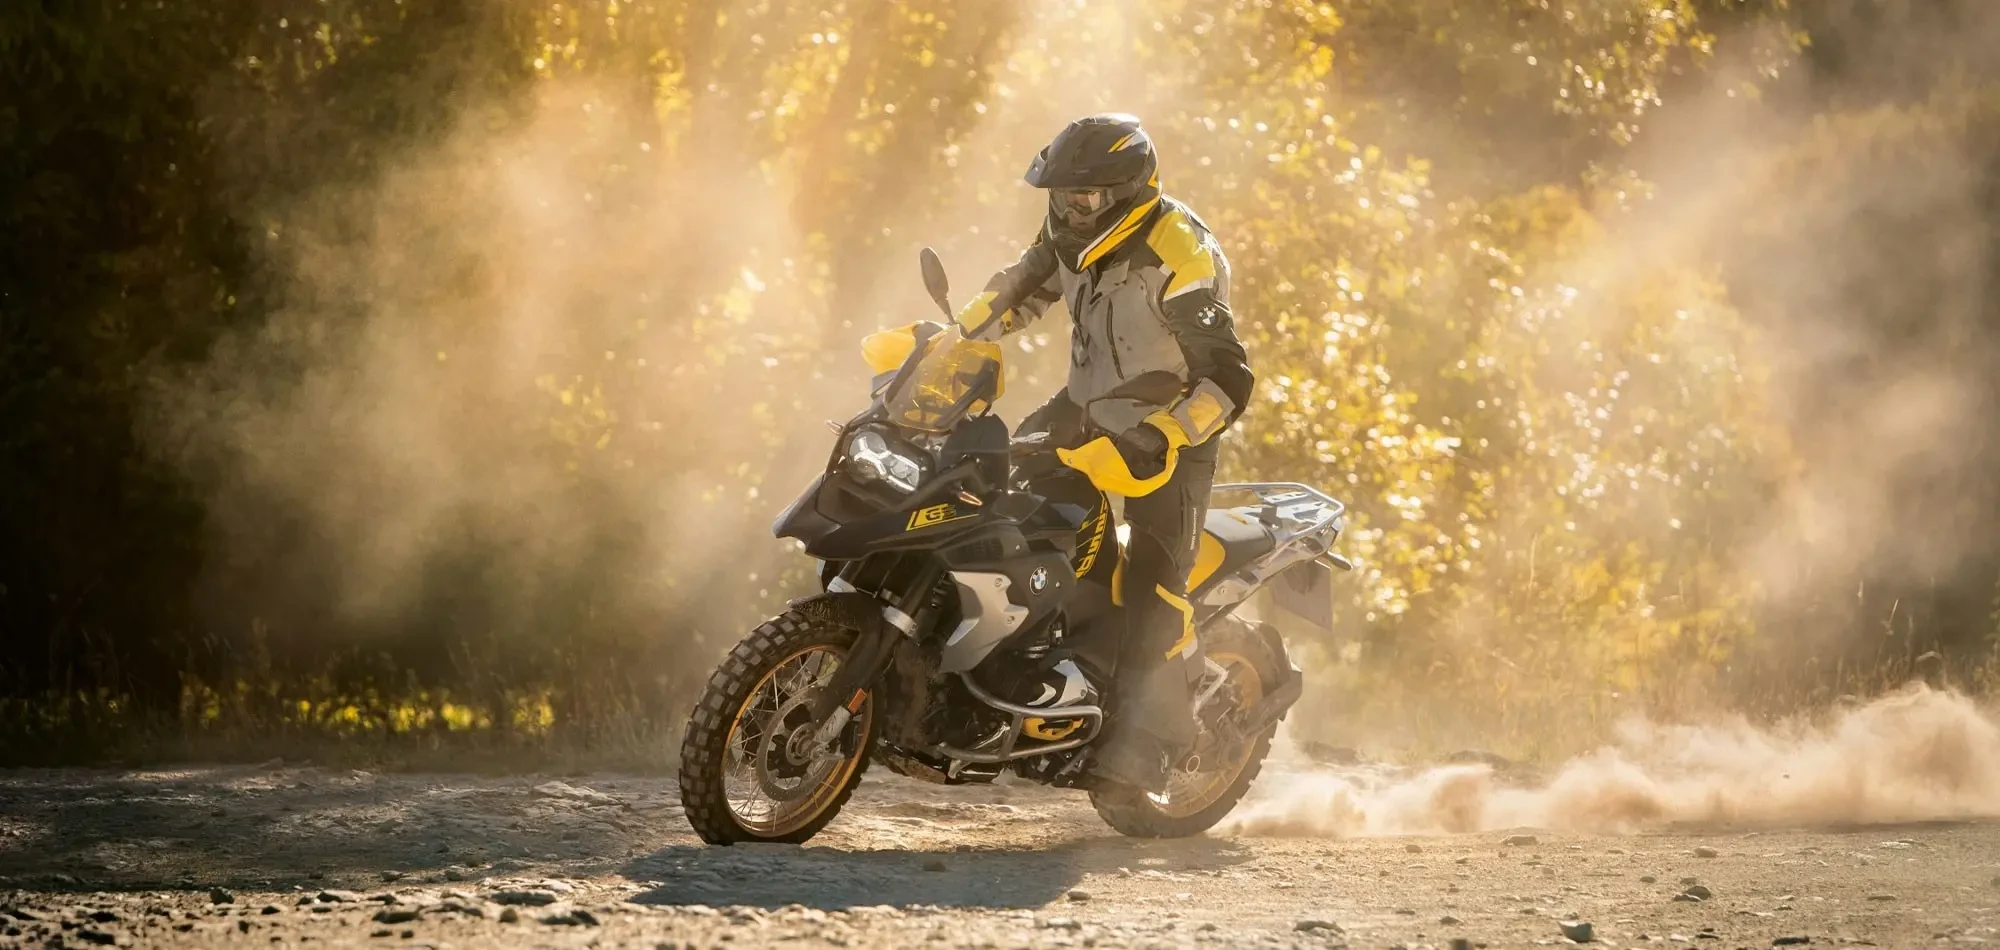 Riding BMW R 1250 GS Triple Black off road with a rear wheel slide